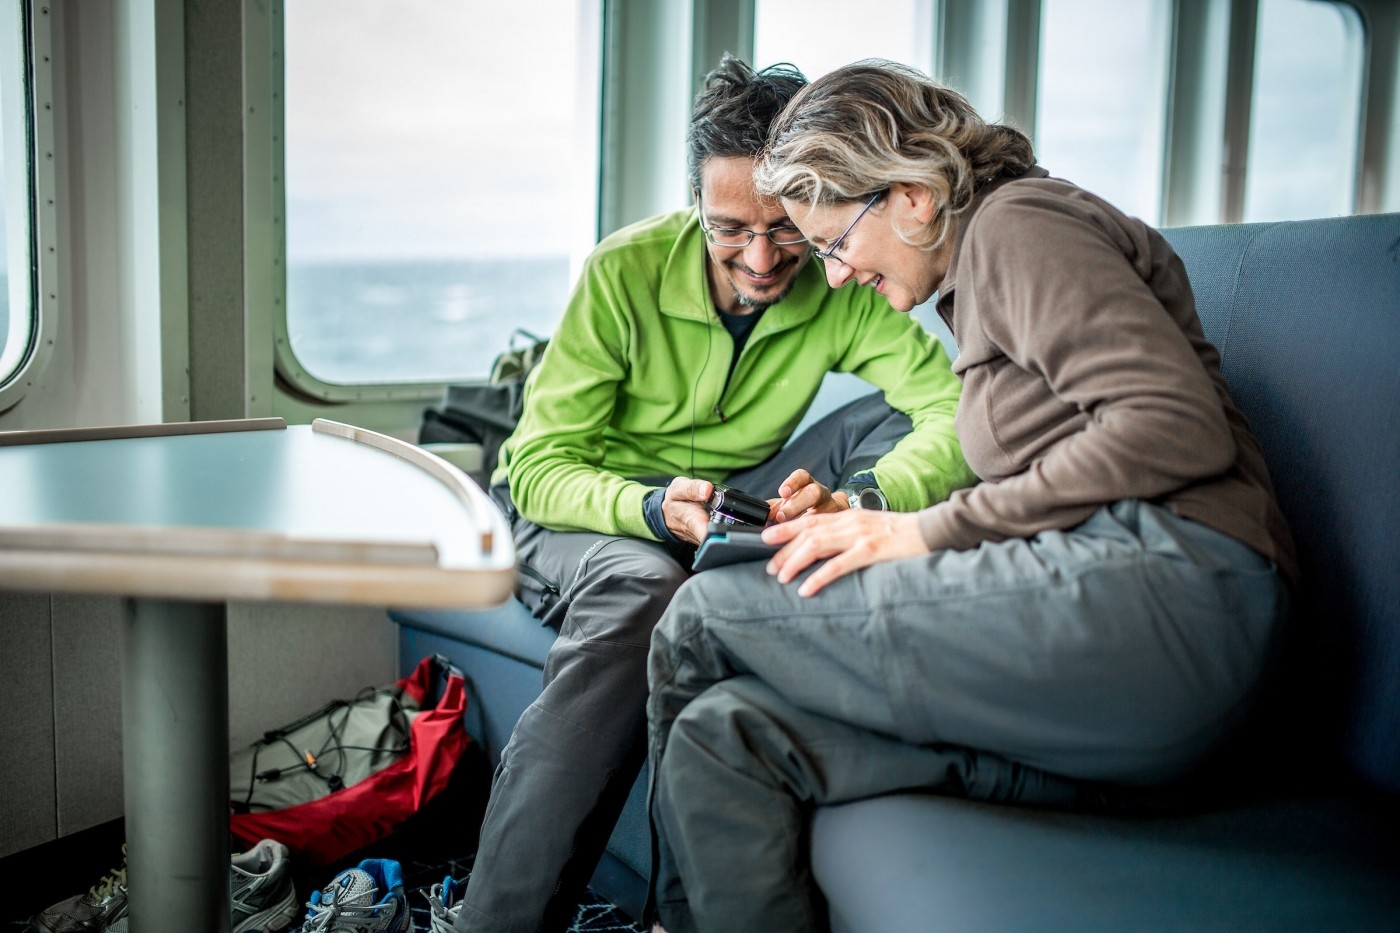 Two guests in the lounge on Sarfaq Ittuk in Greenland. Photo by Mads Pihl - Visit Greenland